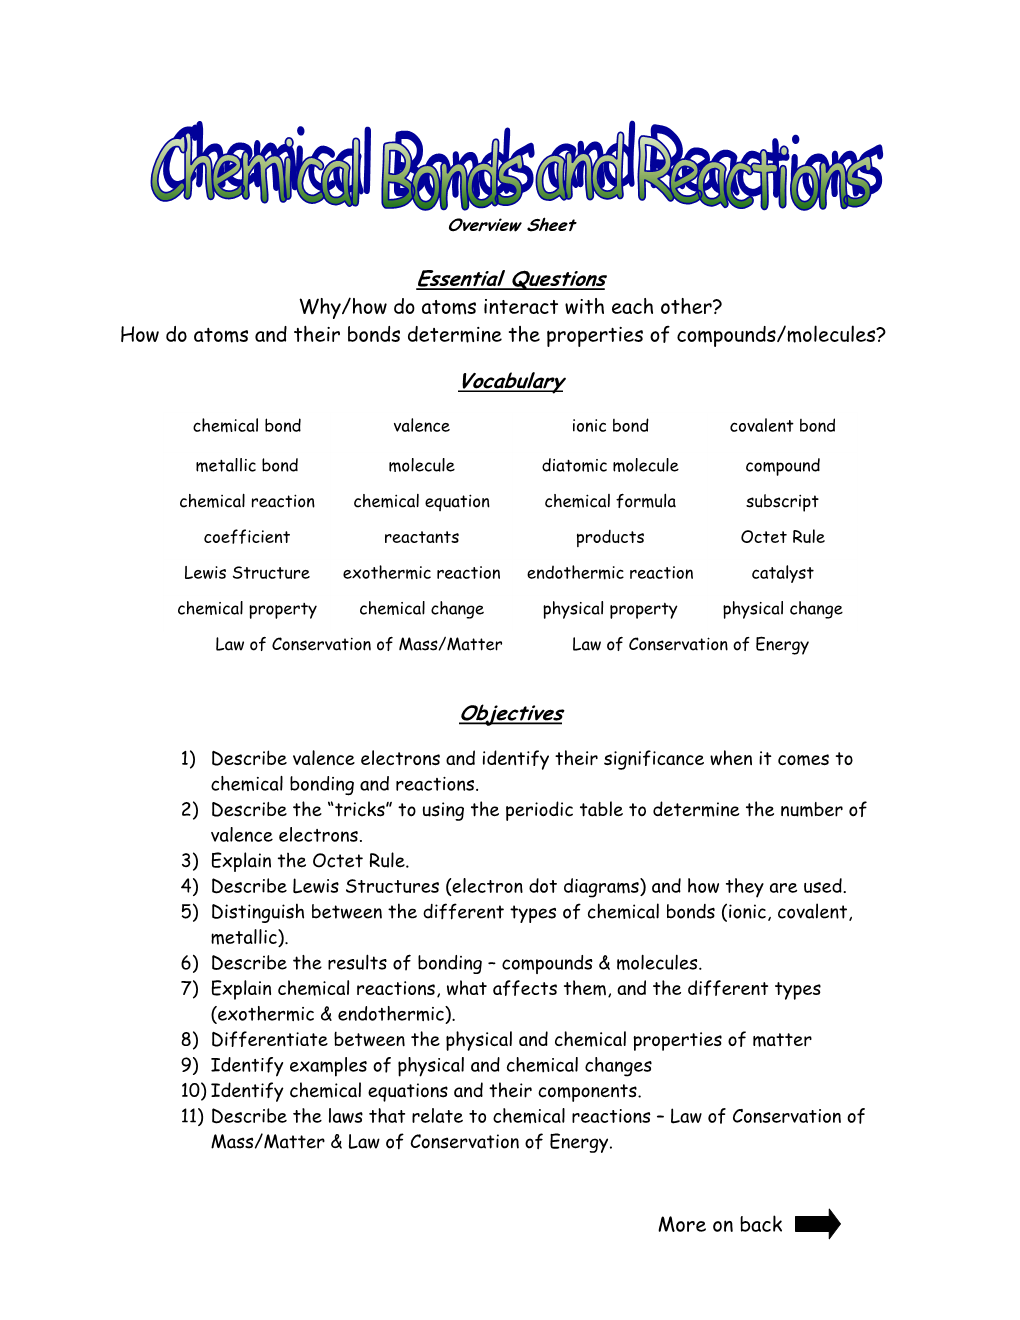 Chemical Bonds and Reactions Overview Sheet